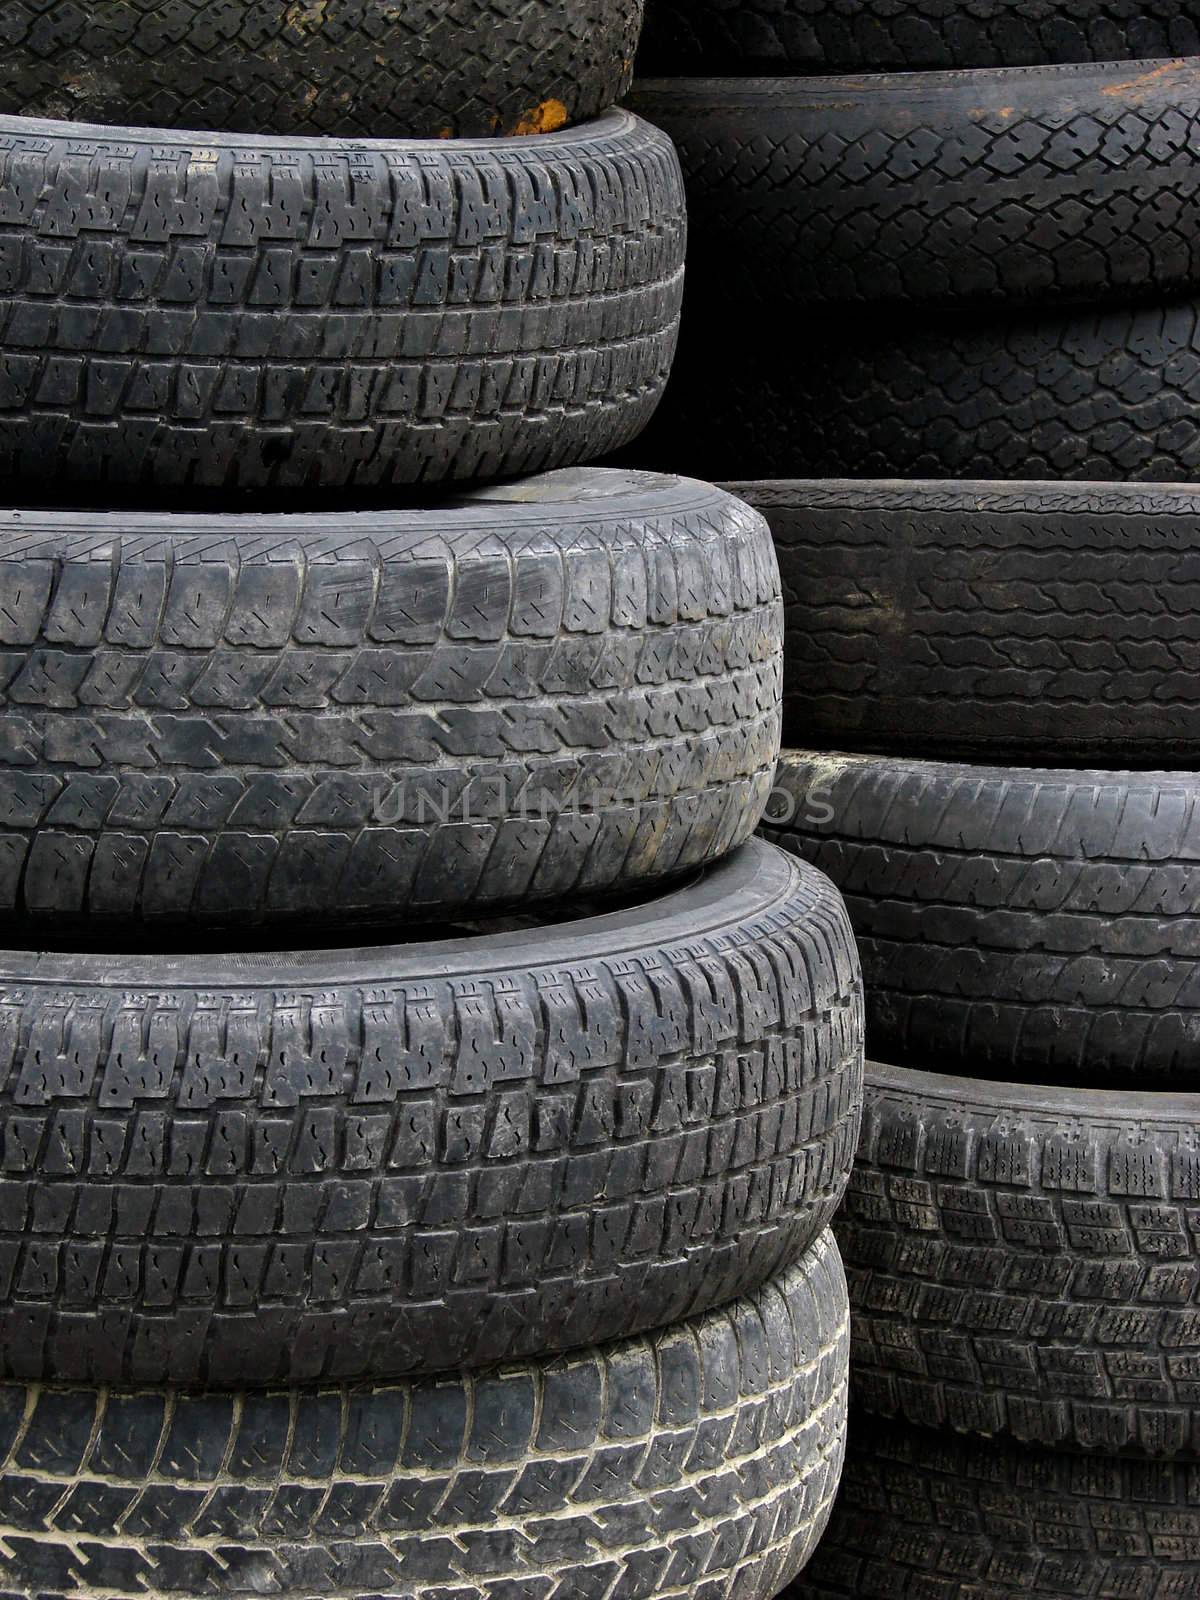 Old useless tires stacked up in two piles in a recycling plant